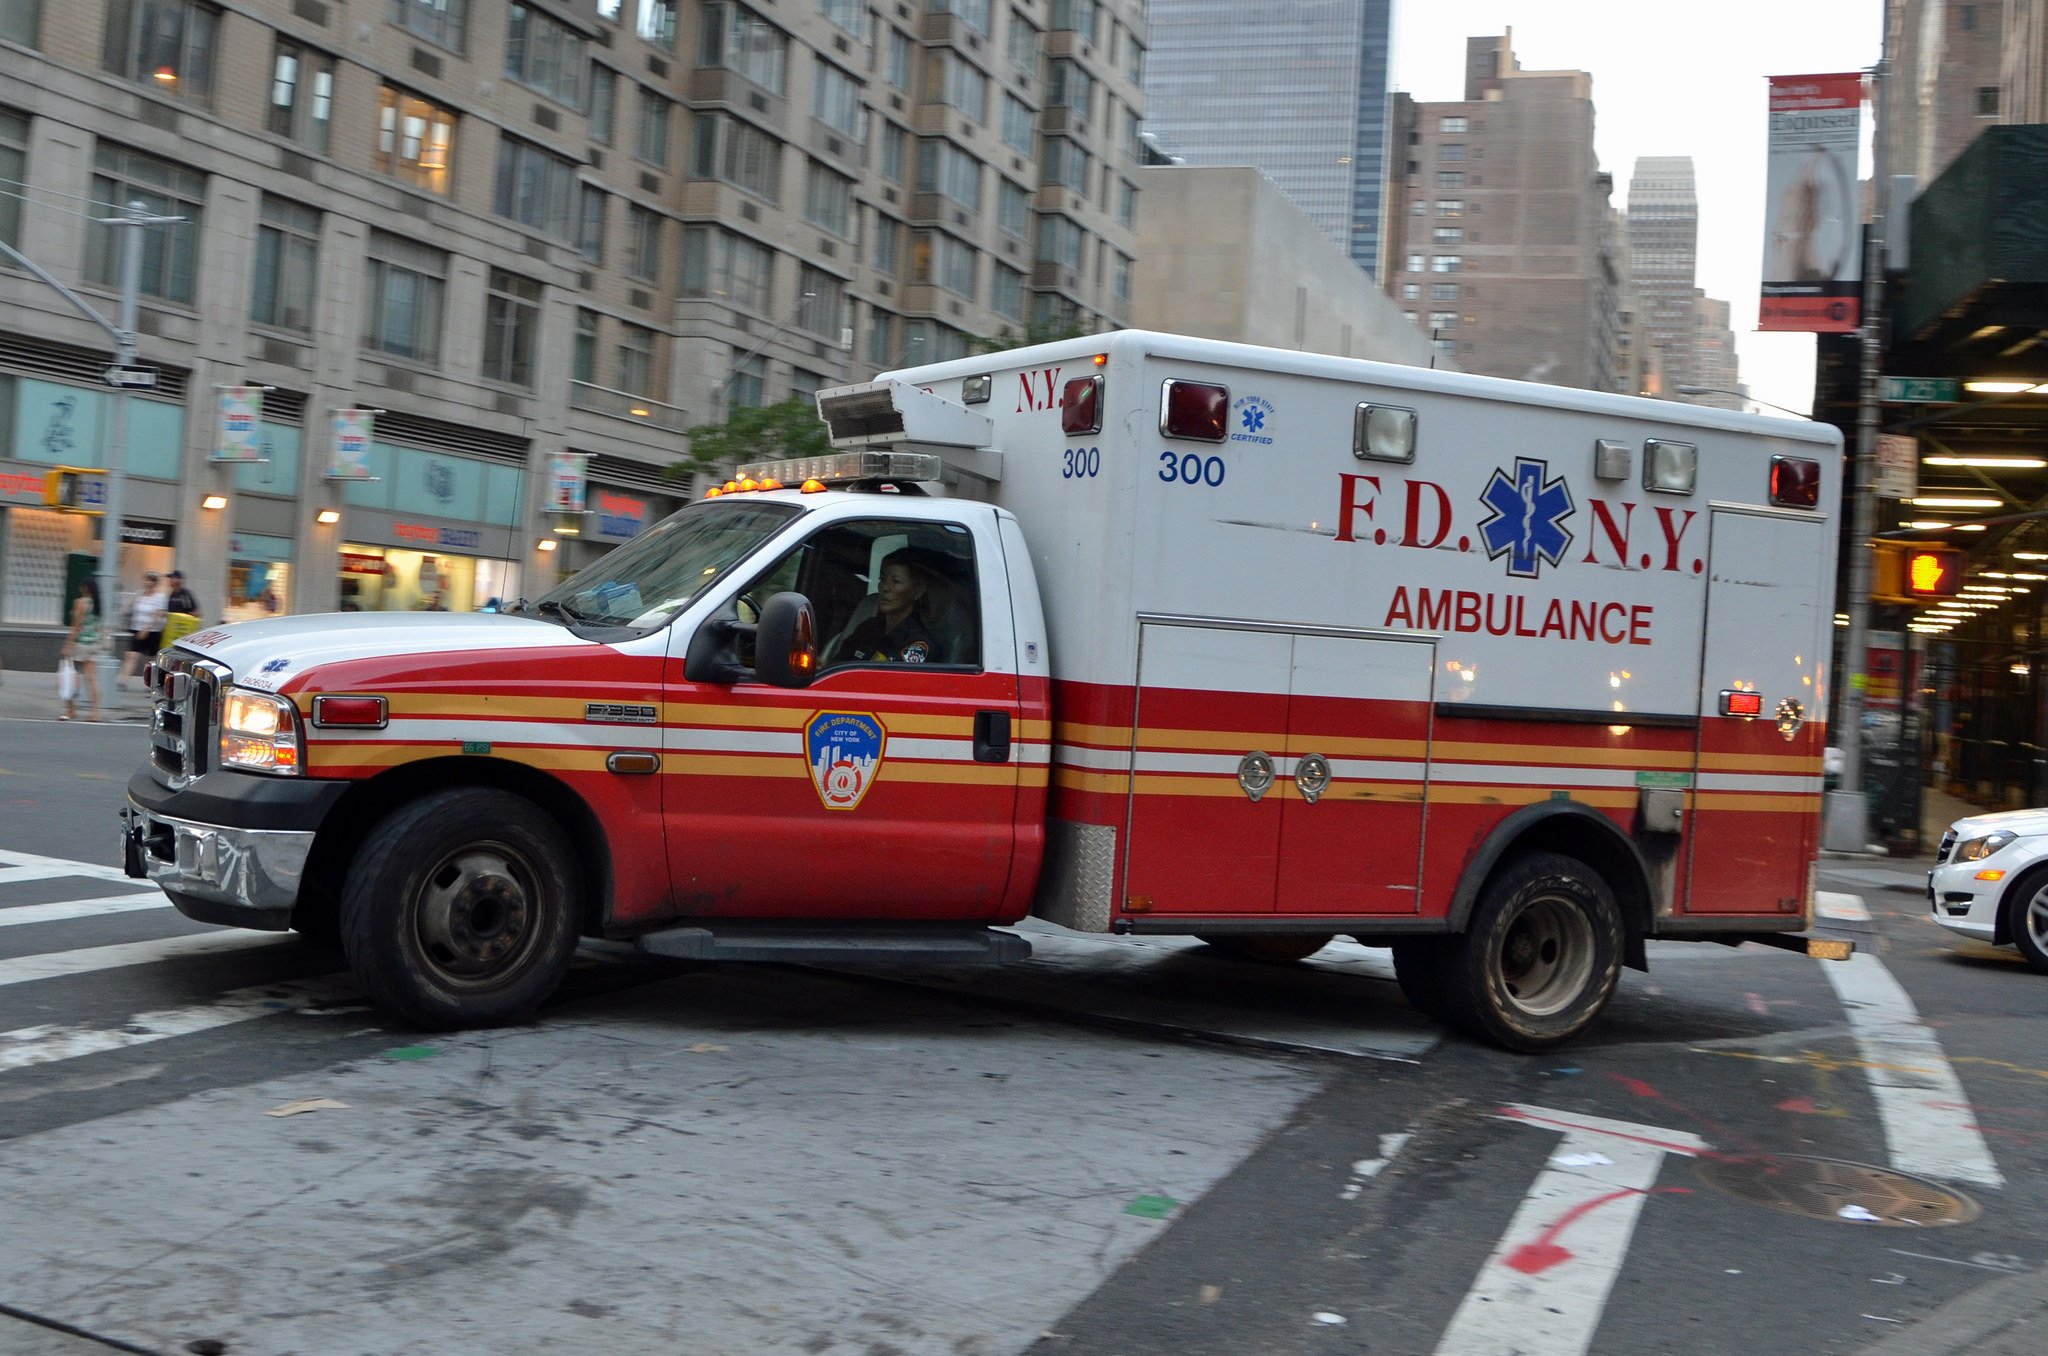 ambulance, Camion, Cars, Boat, Emergency, Fire, Fire departments, Fire, Truck, Medic, New york, F, D, N, Y, Pompier, Rescue, Suv, Truck, Usa Wallpaper